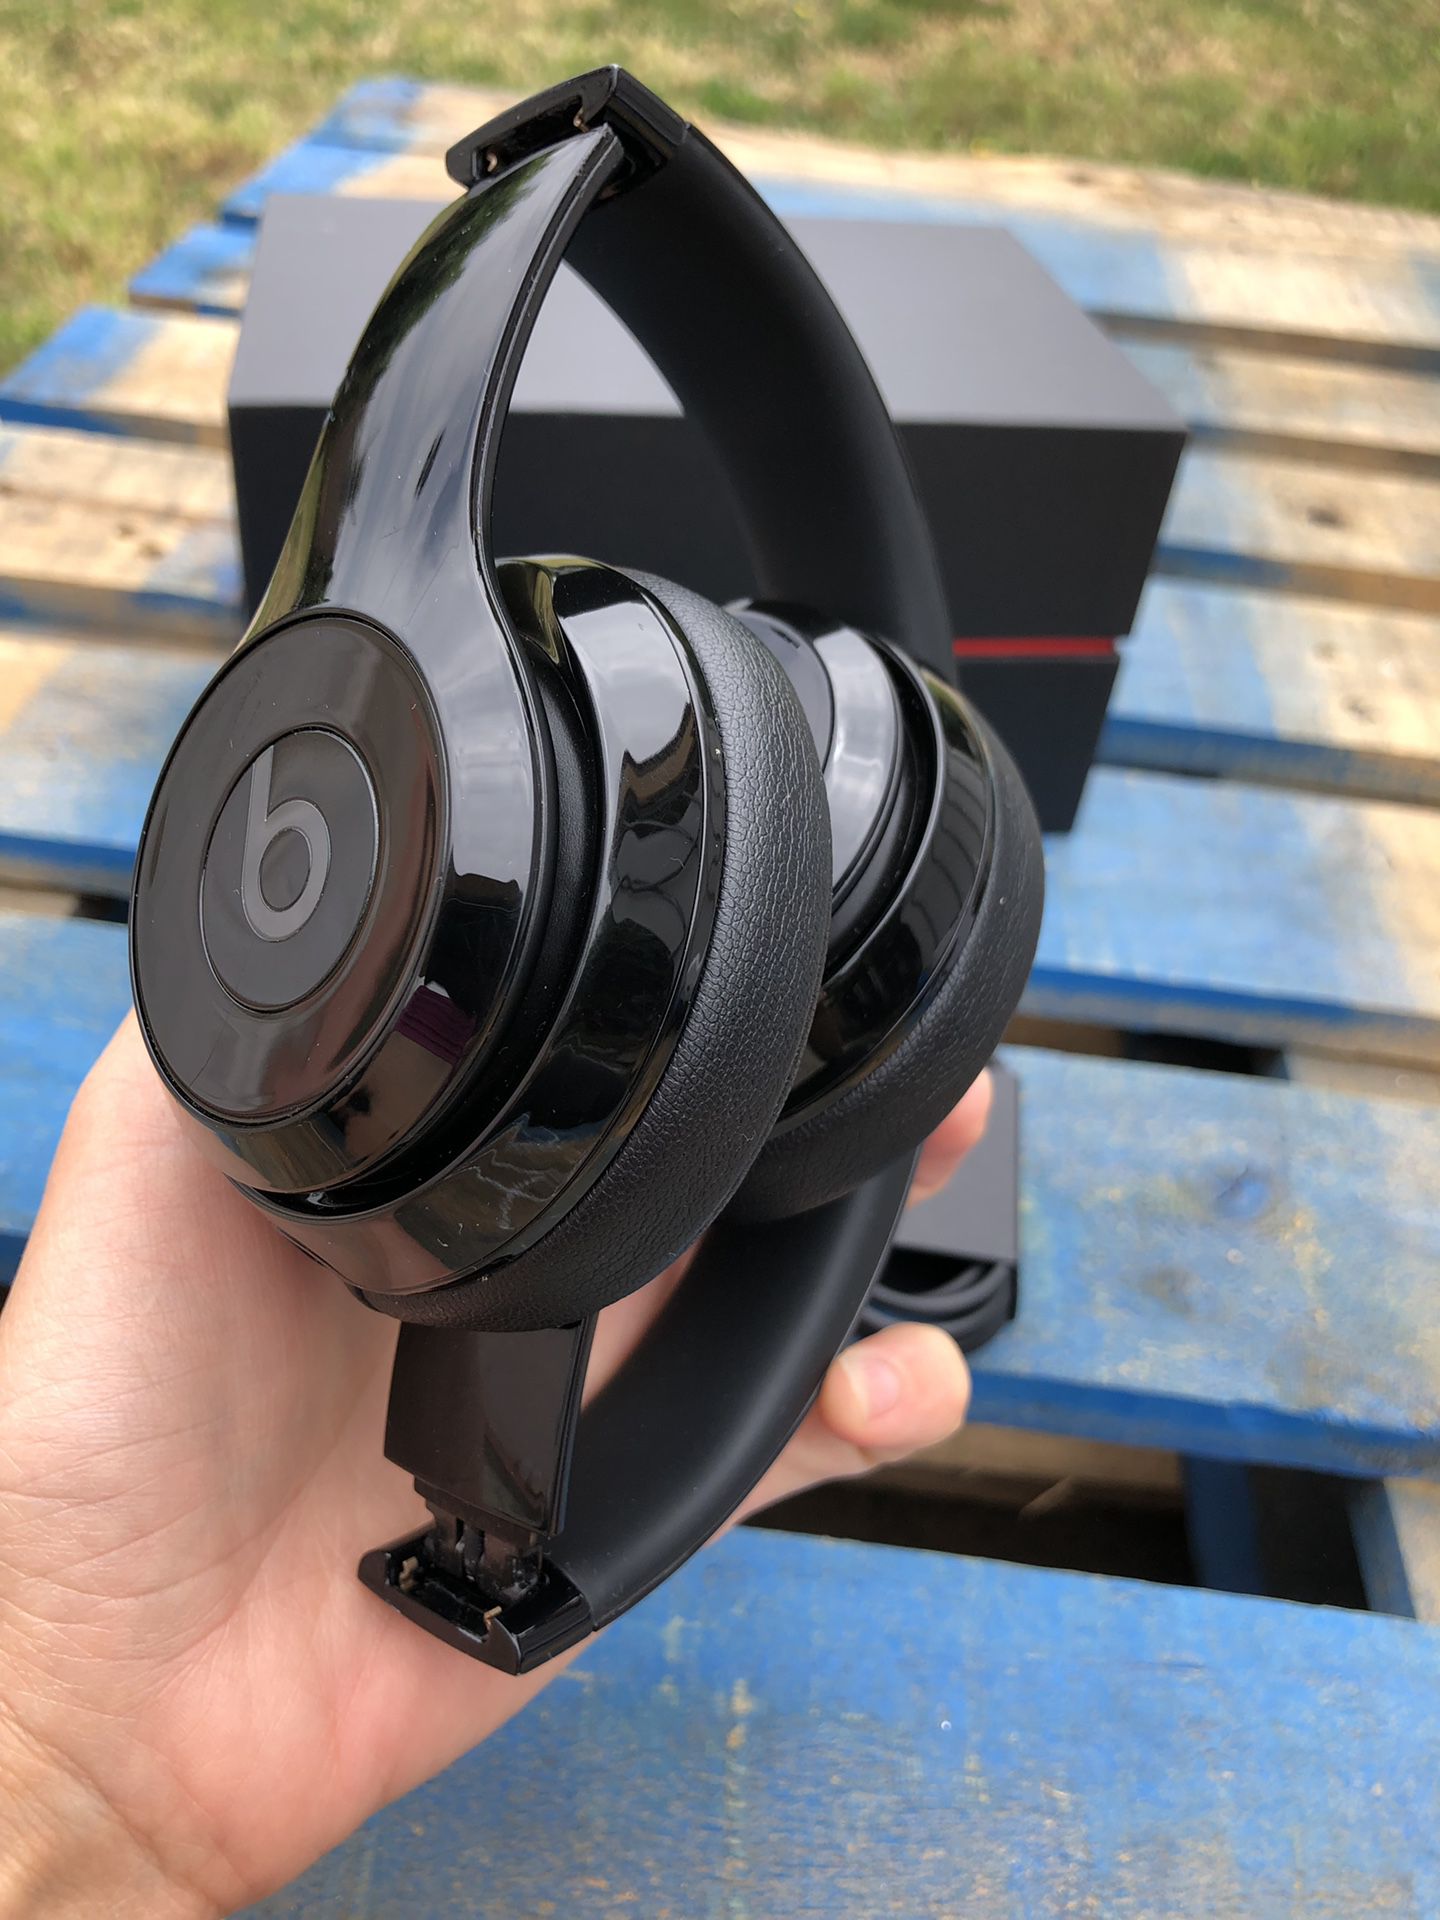 Beats solo 3 Bluetooth wireless headphones 🎧 matt black 100% original beats guaranteed 💪💪 USED with used signs and minor scratches Gloss Black